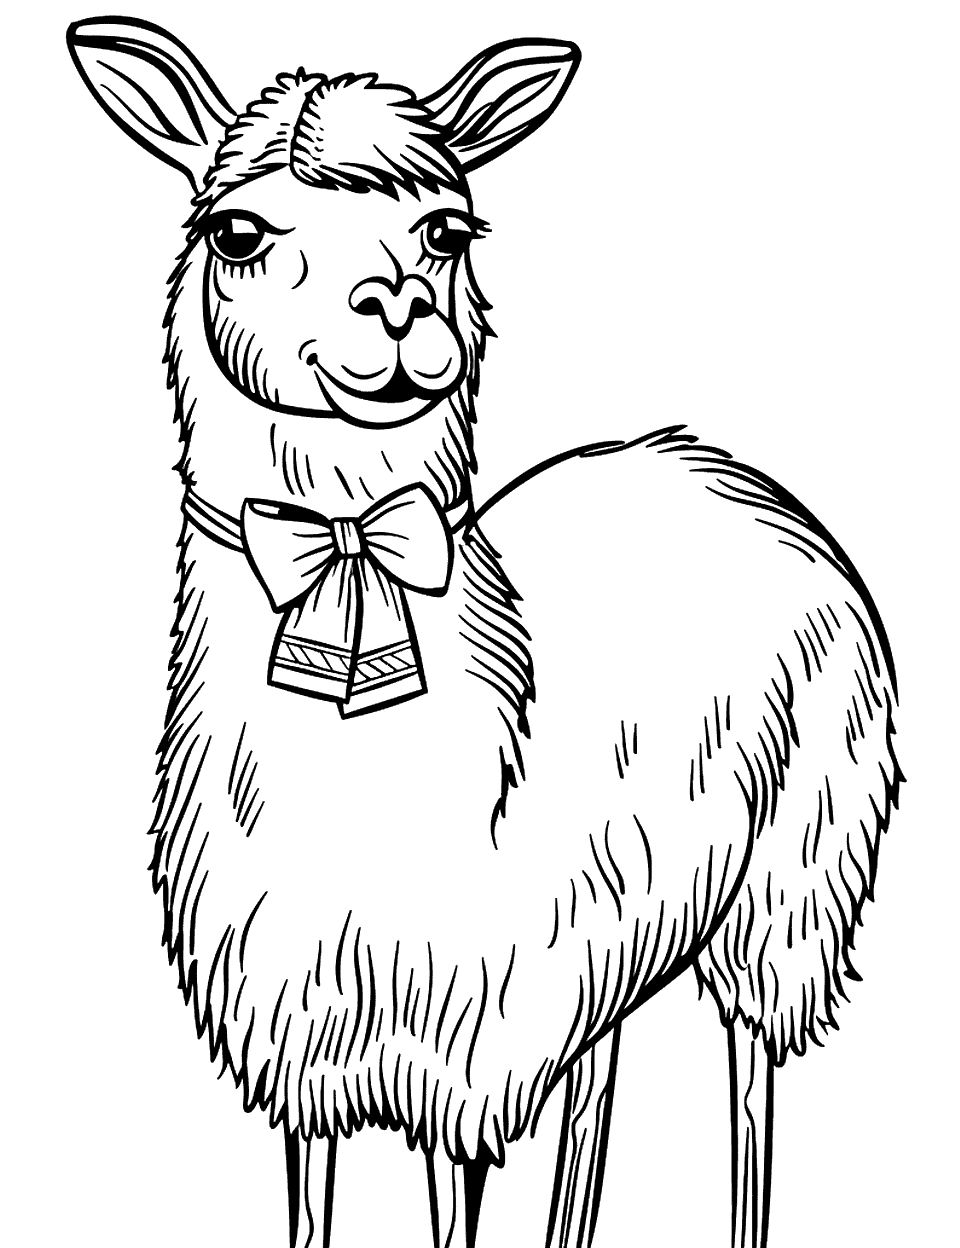 Llama with a Bow Tie Coloring Page - A charming llama wearing a fancy bow tie.